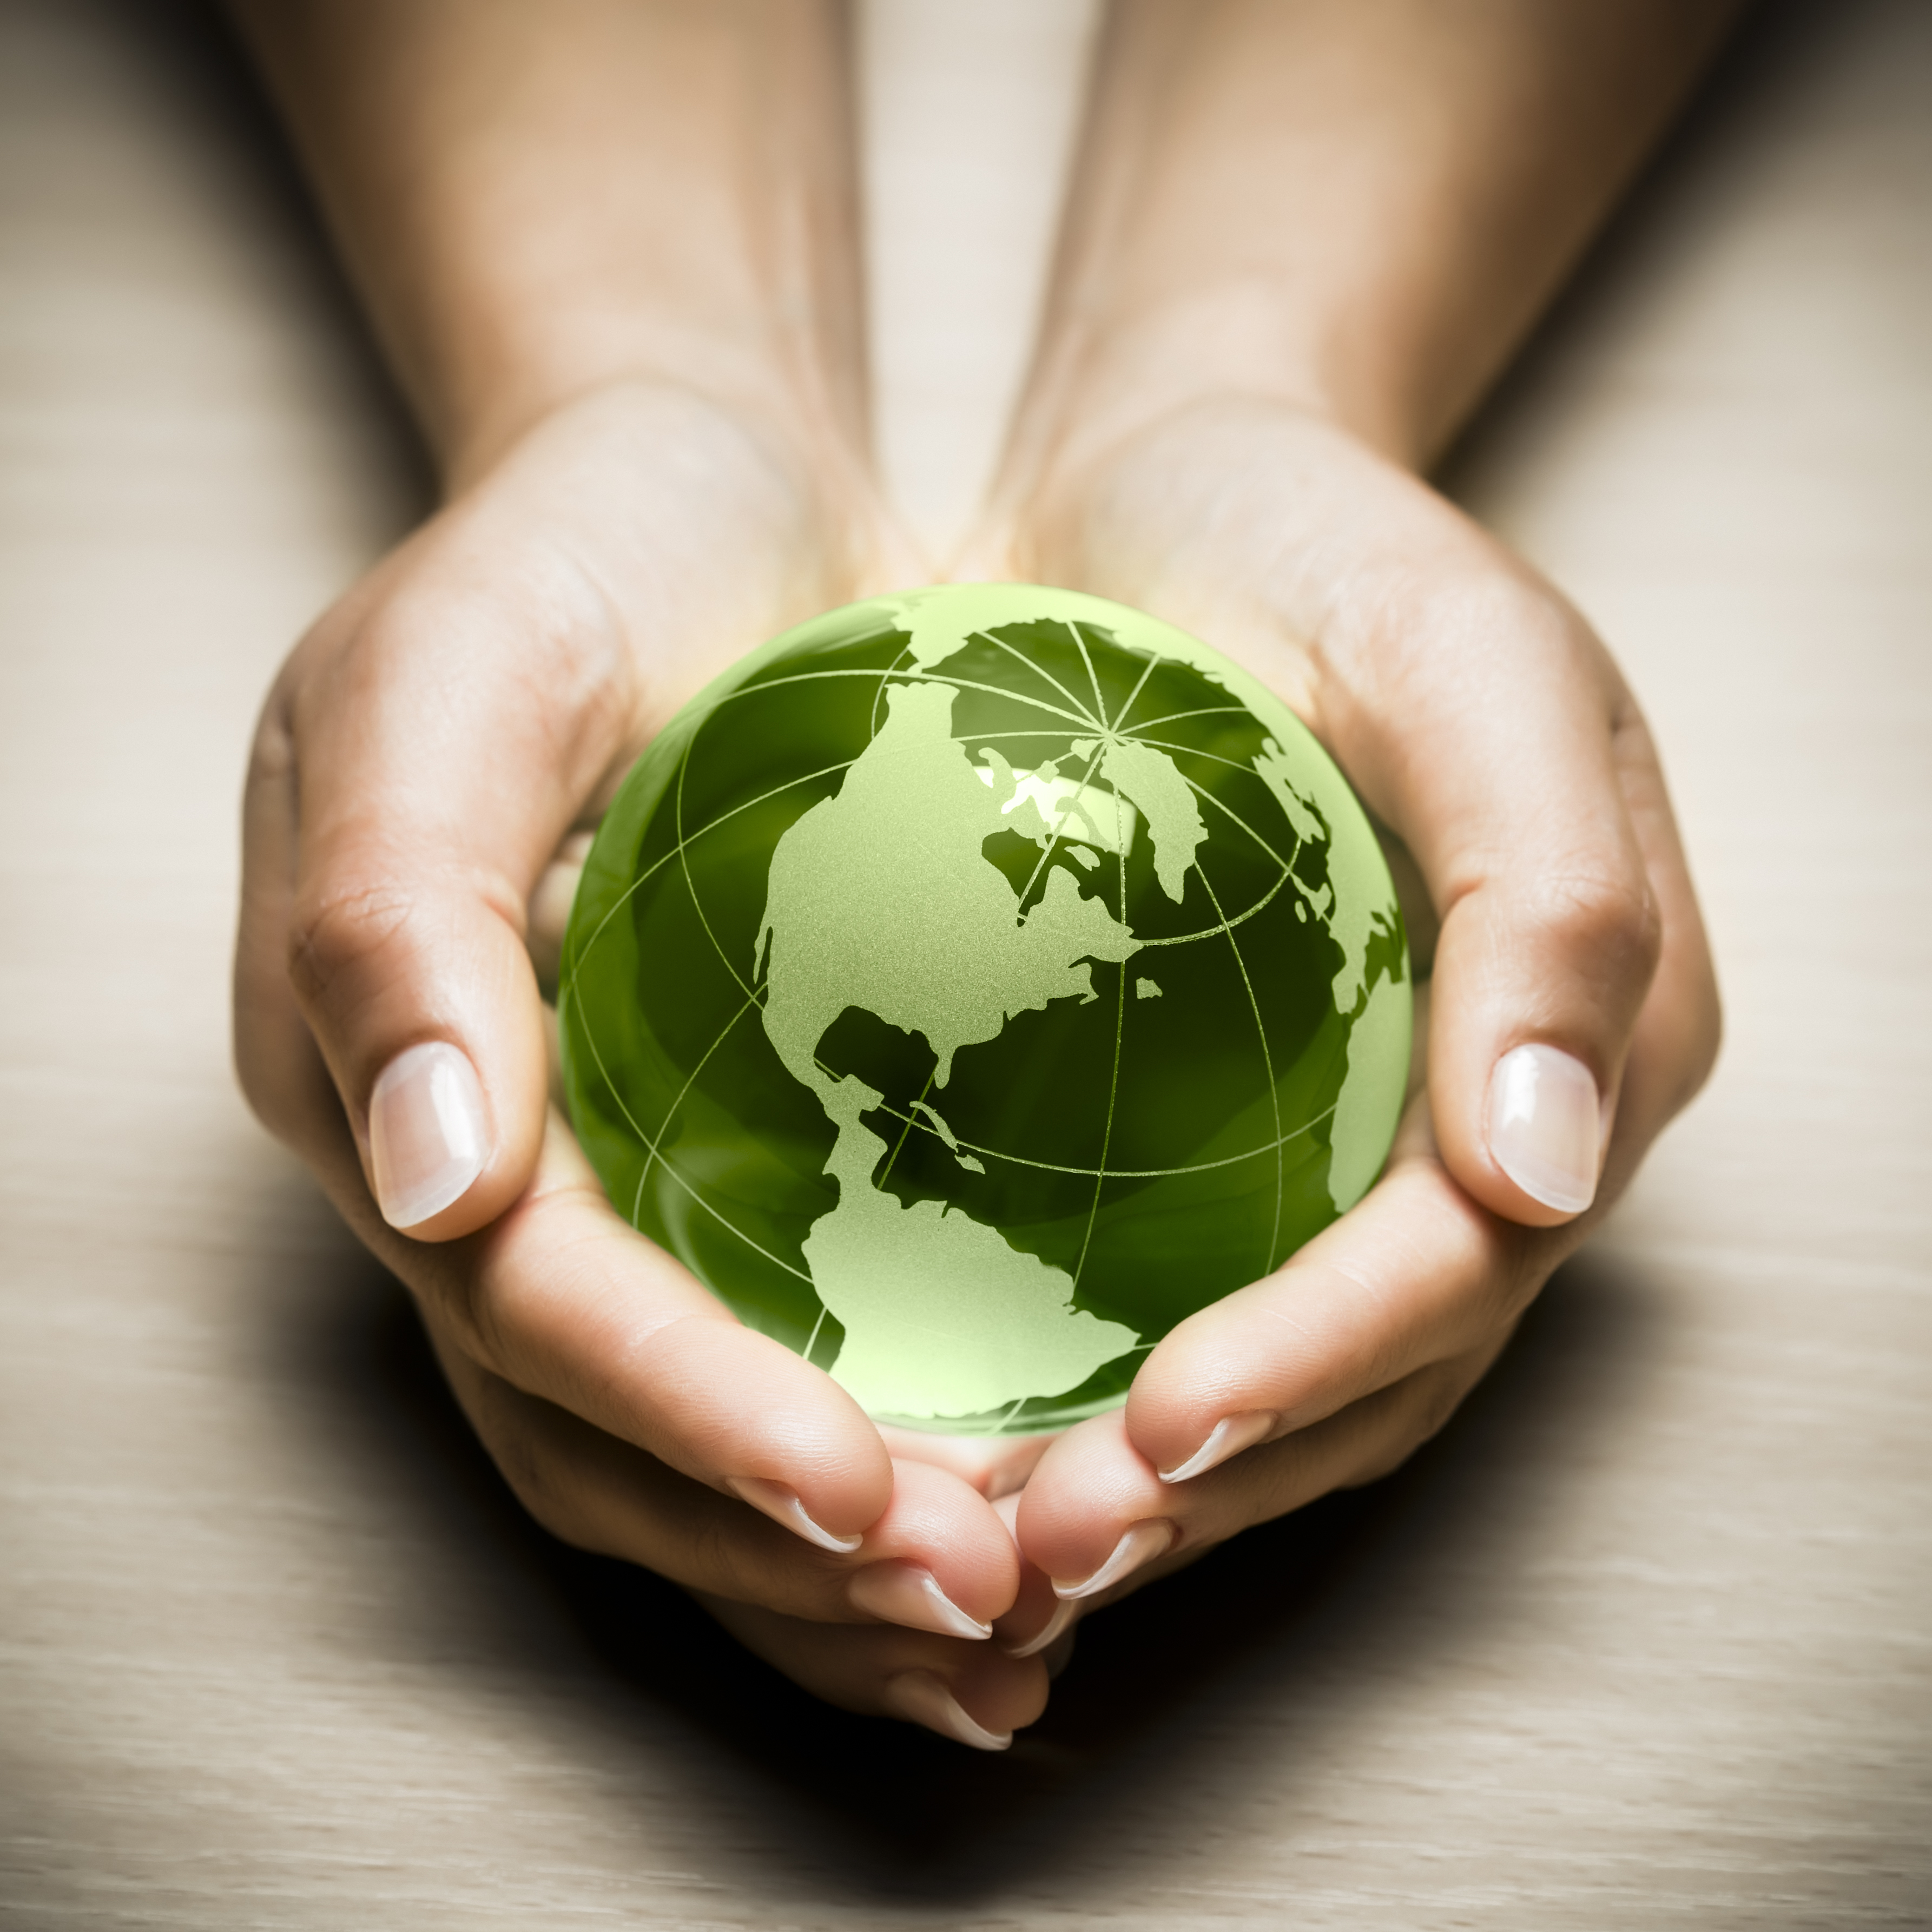 Picture of two hands holding a green globe